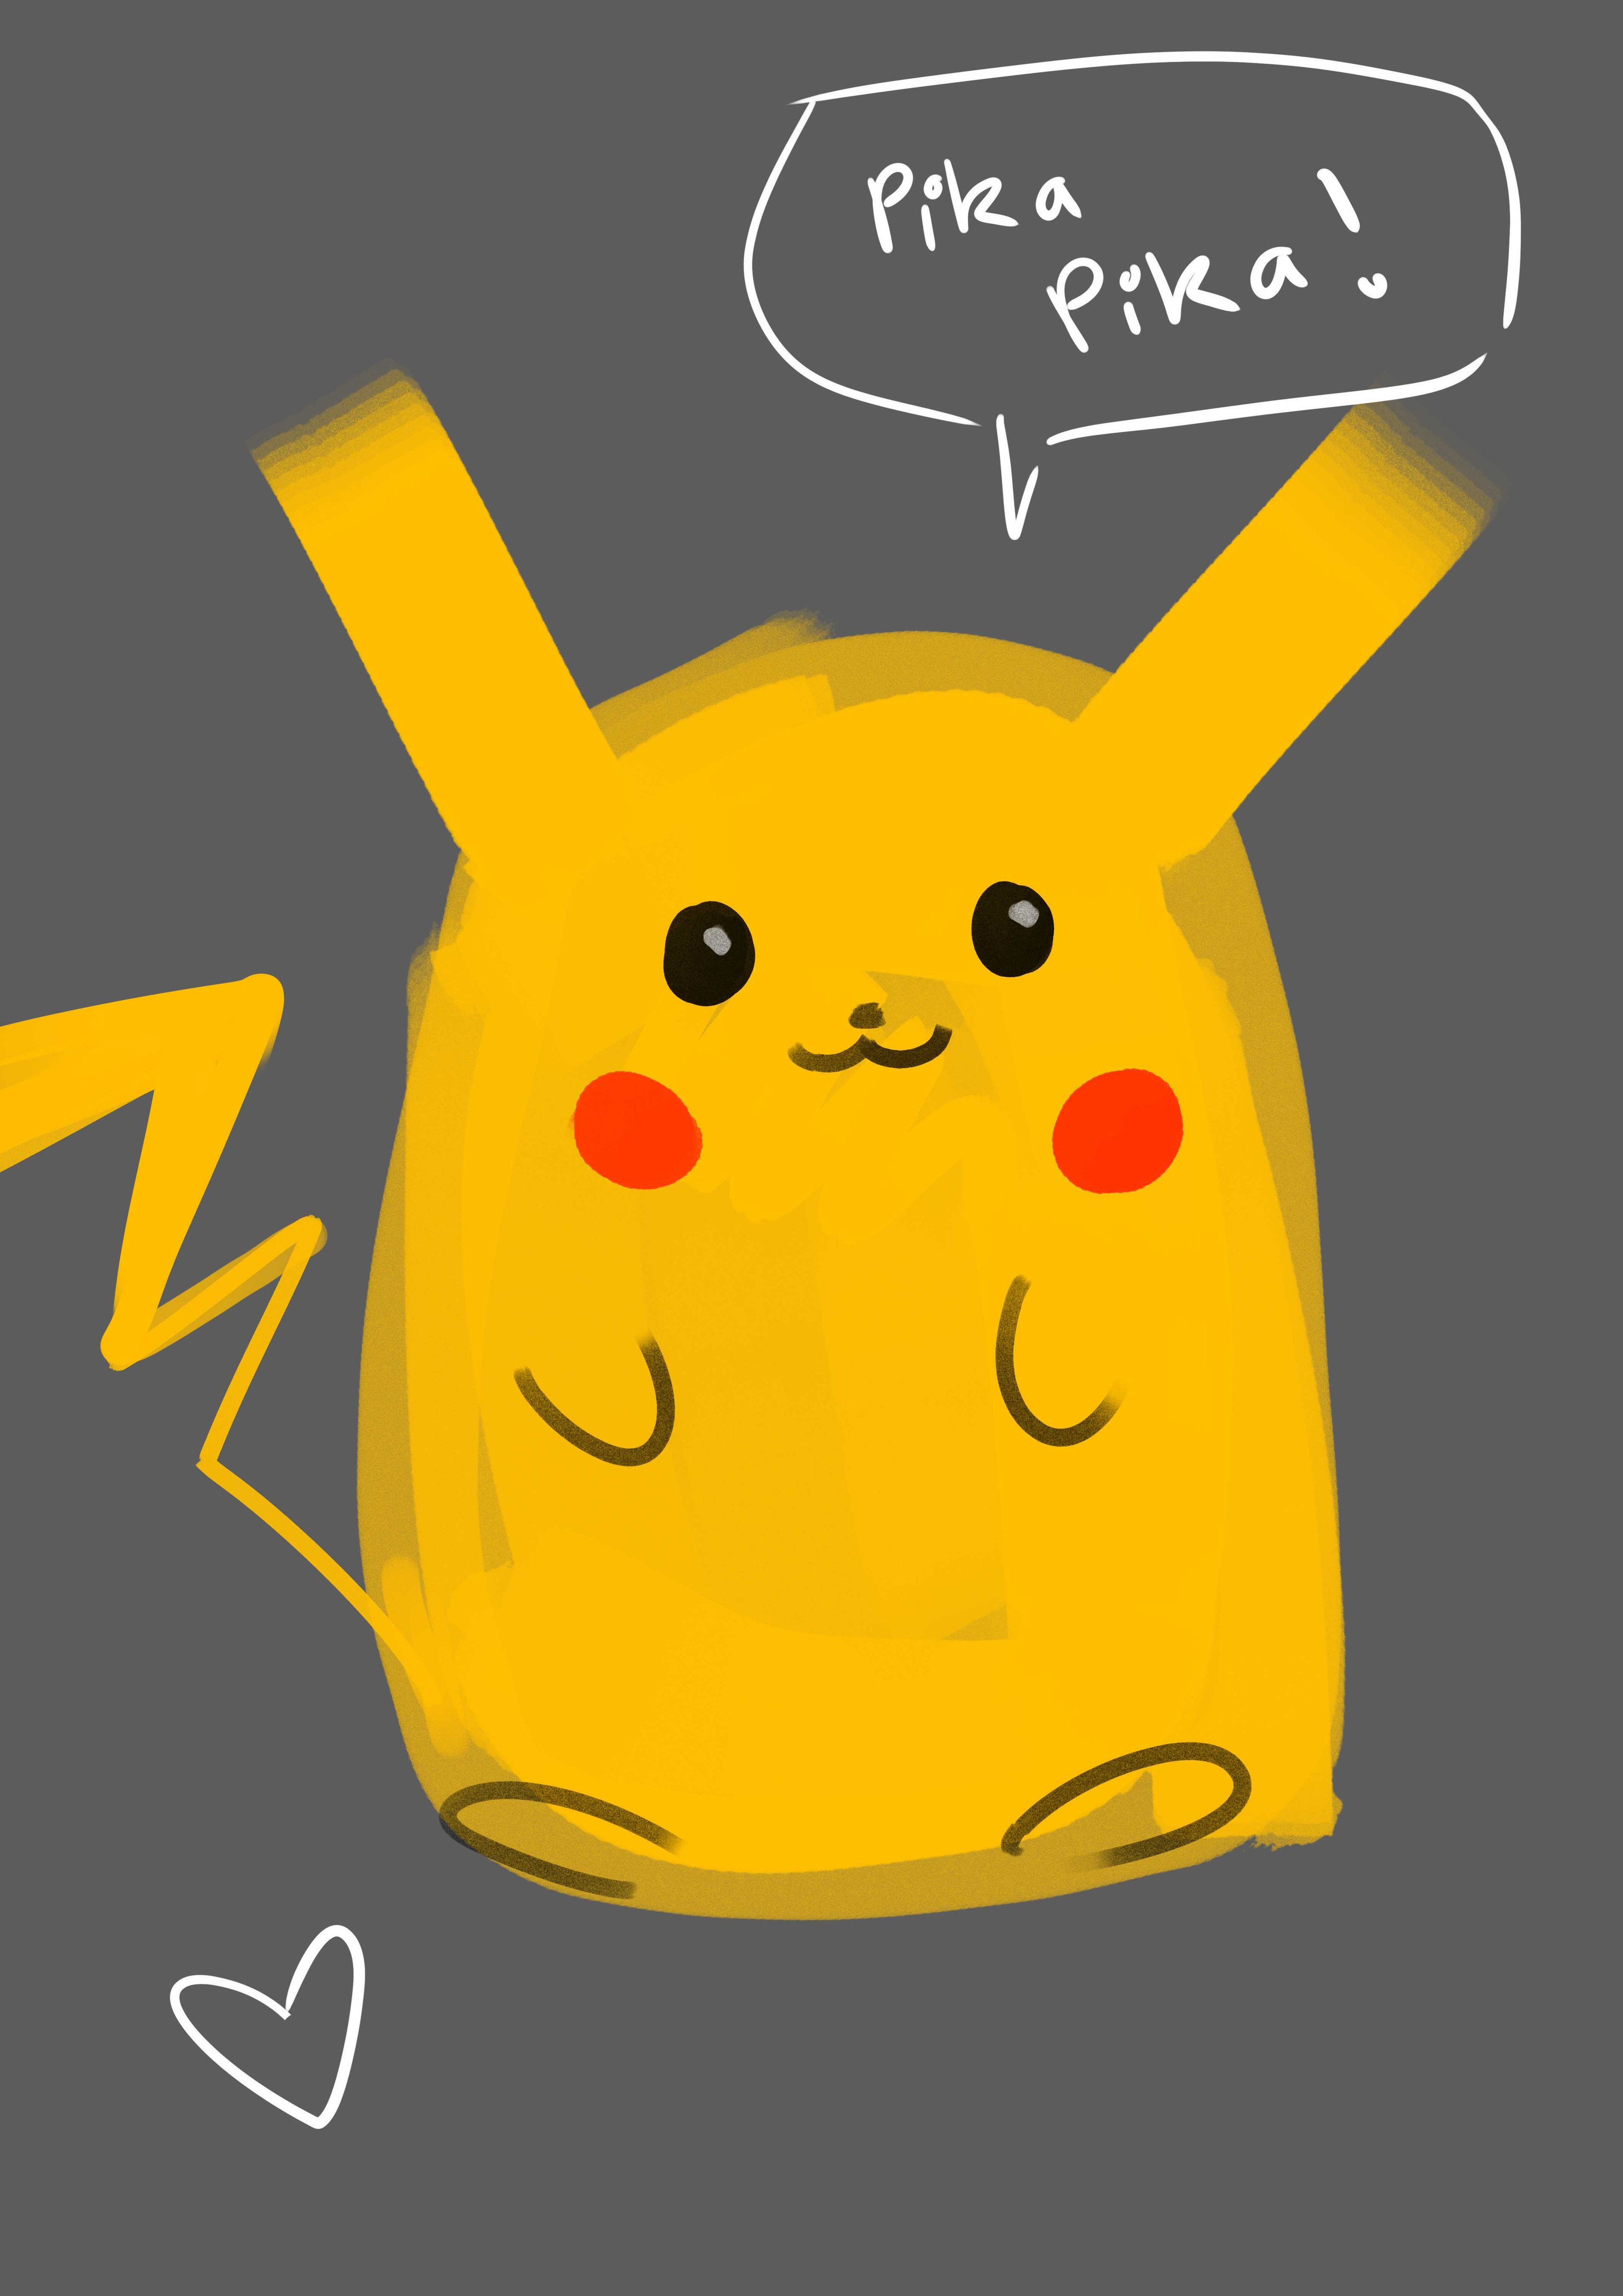 Pikachu before the weight loss